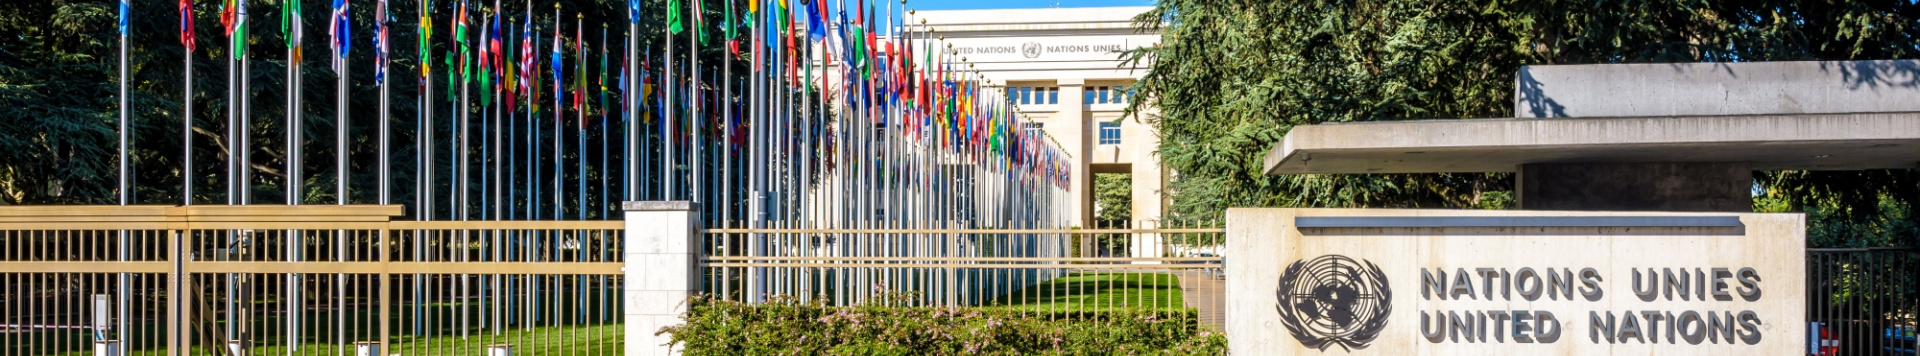 The Palais des Nations from outside, with a view on the Nations Gate, the alley of flags and one of the old buildings.